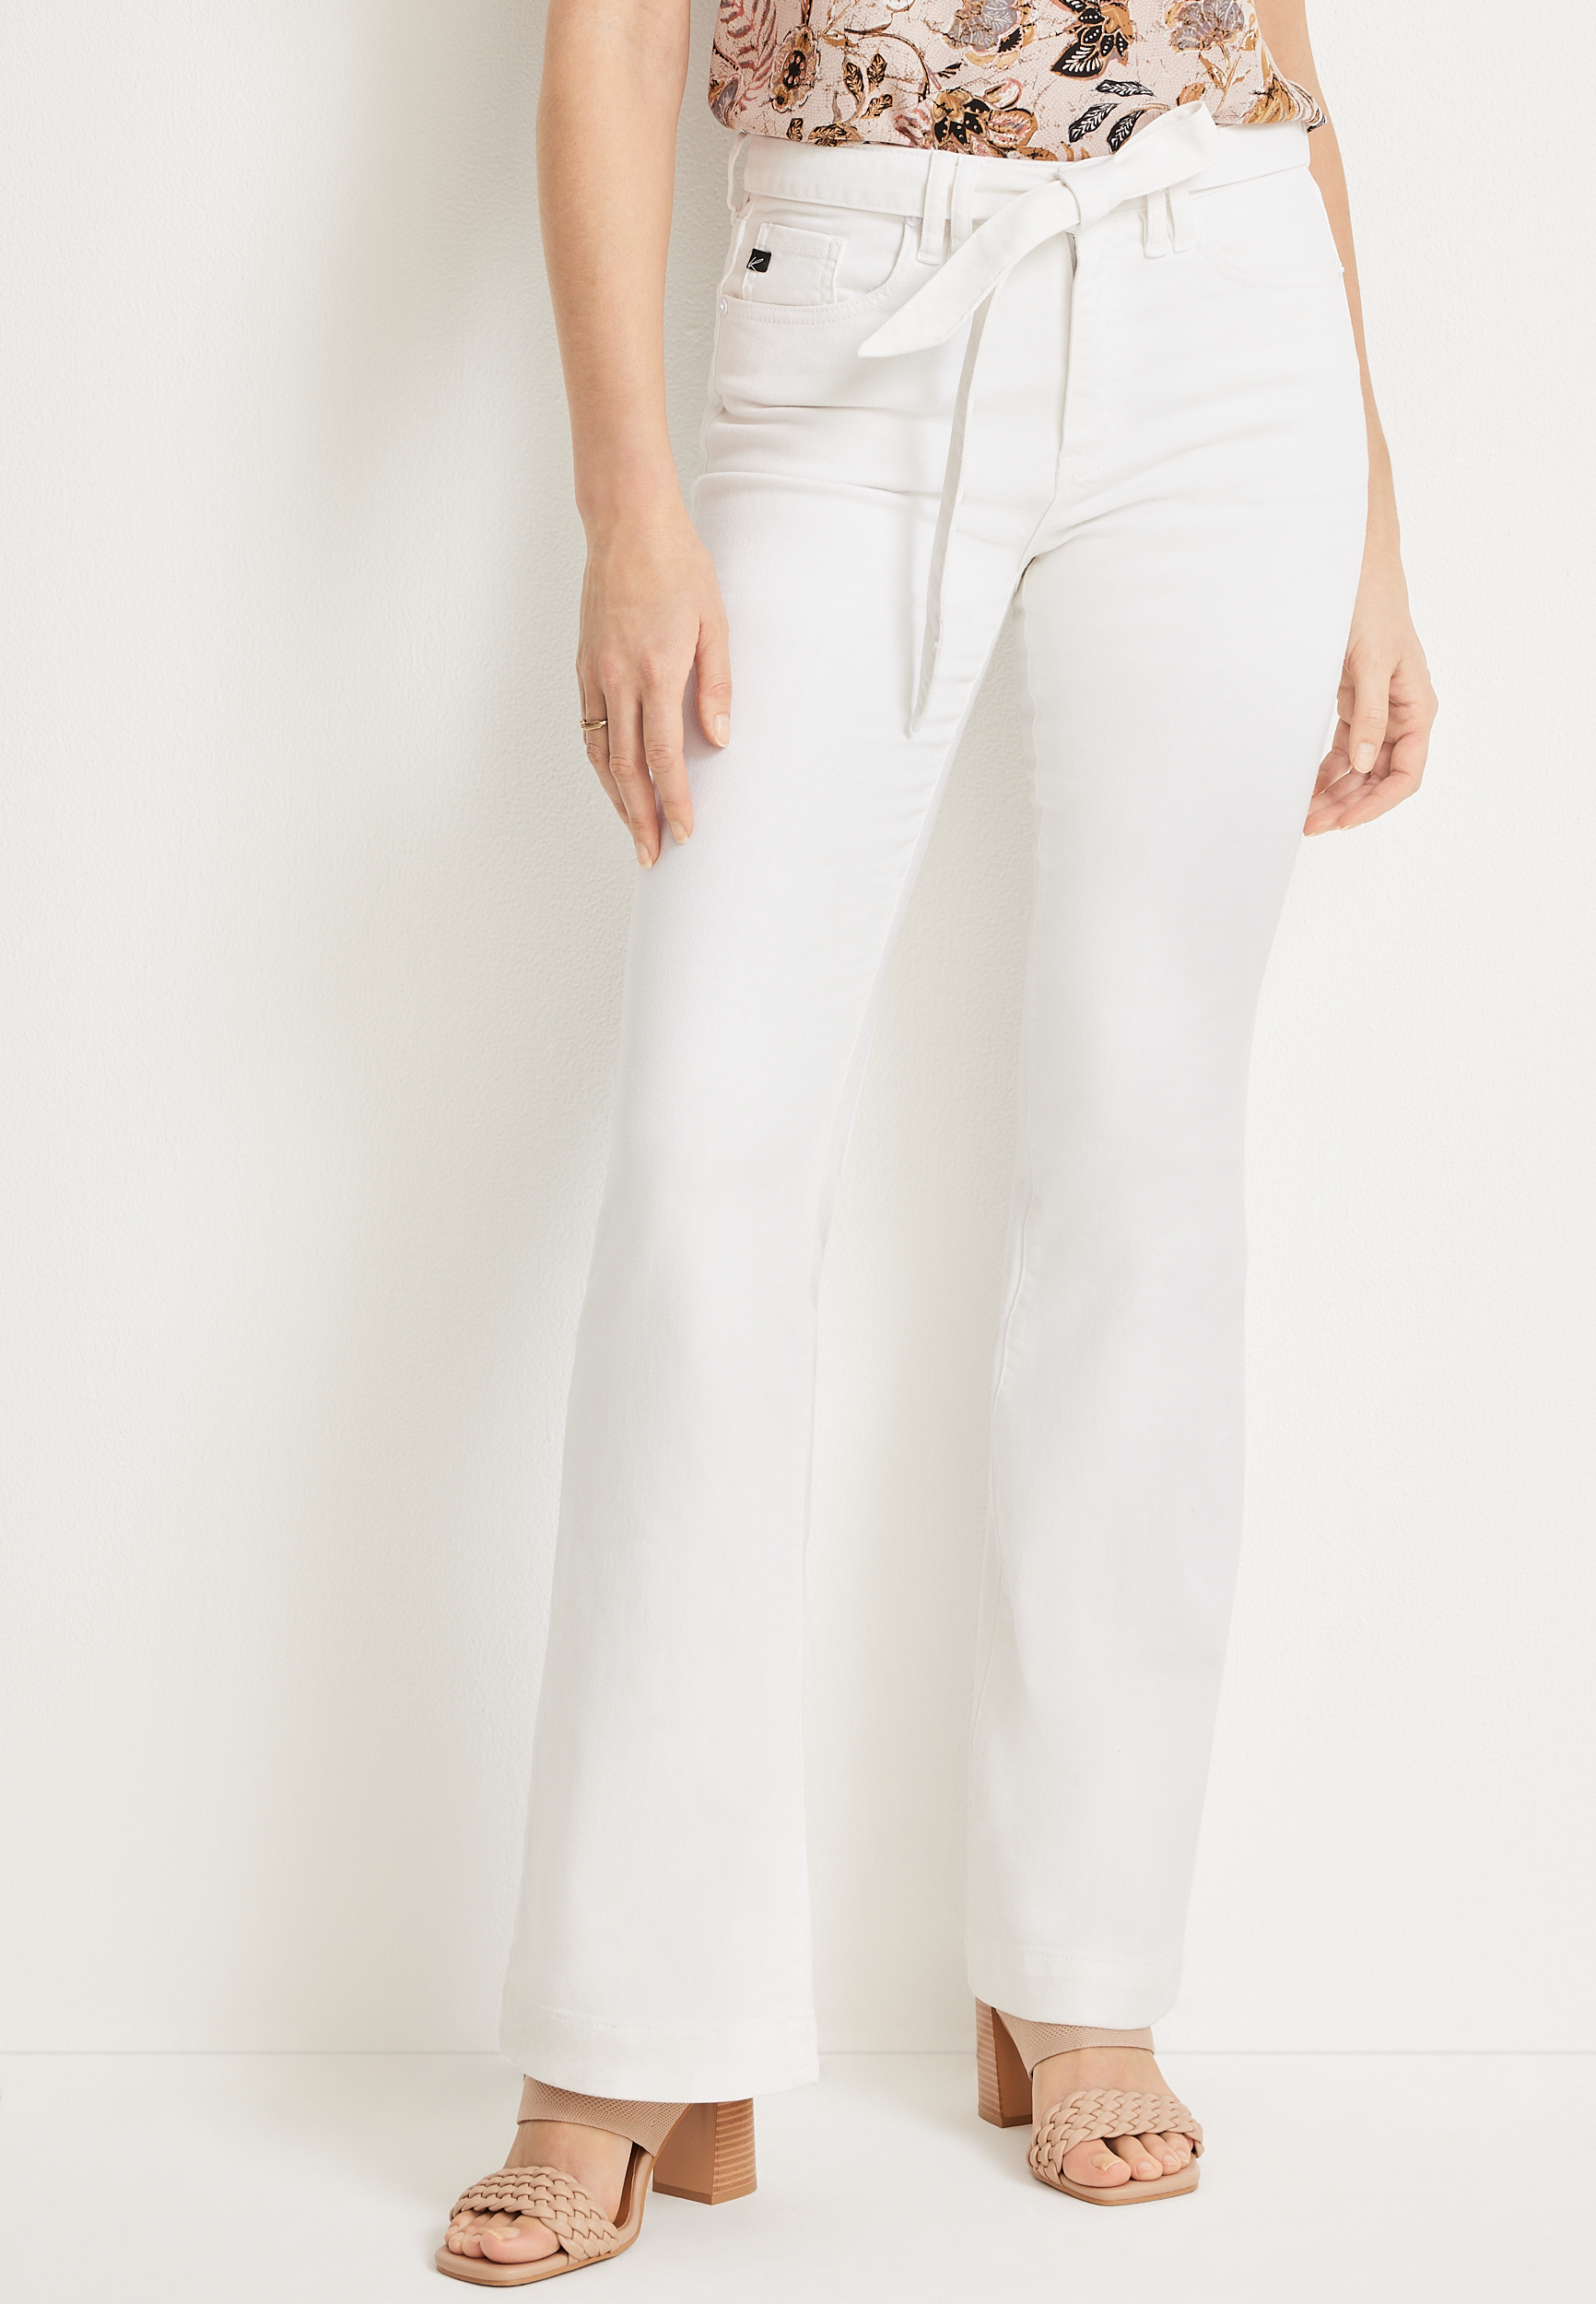 KanCan™ Flare High Rise Belted White Jean | maurices